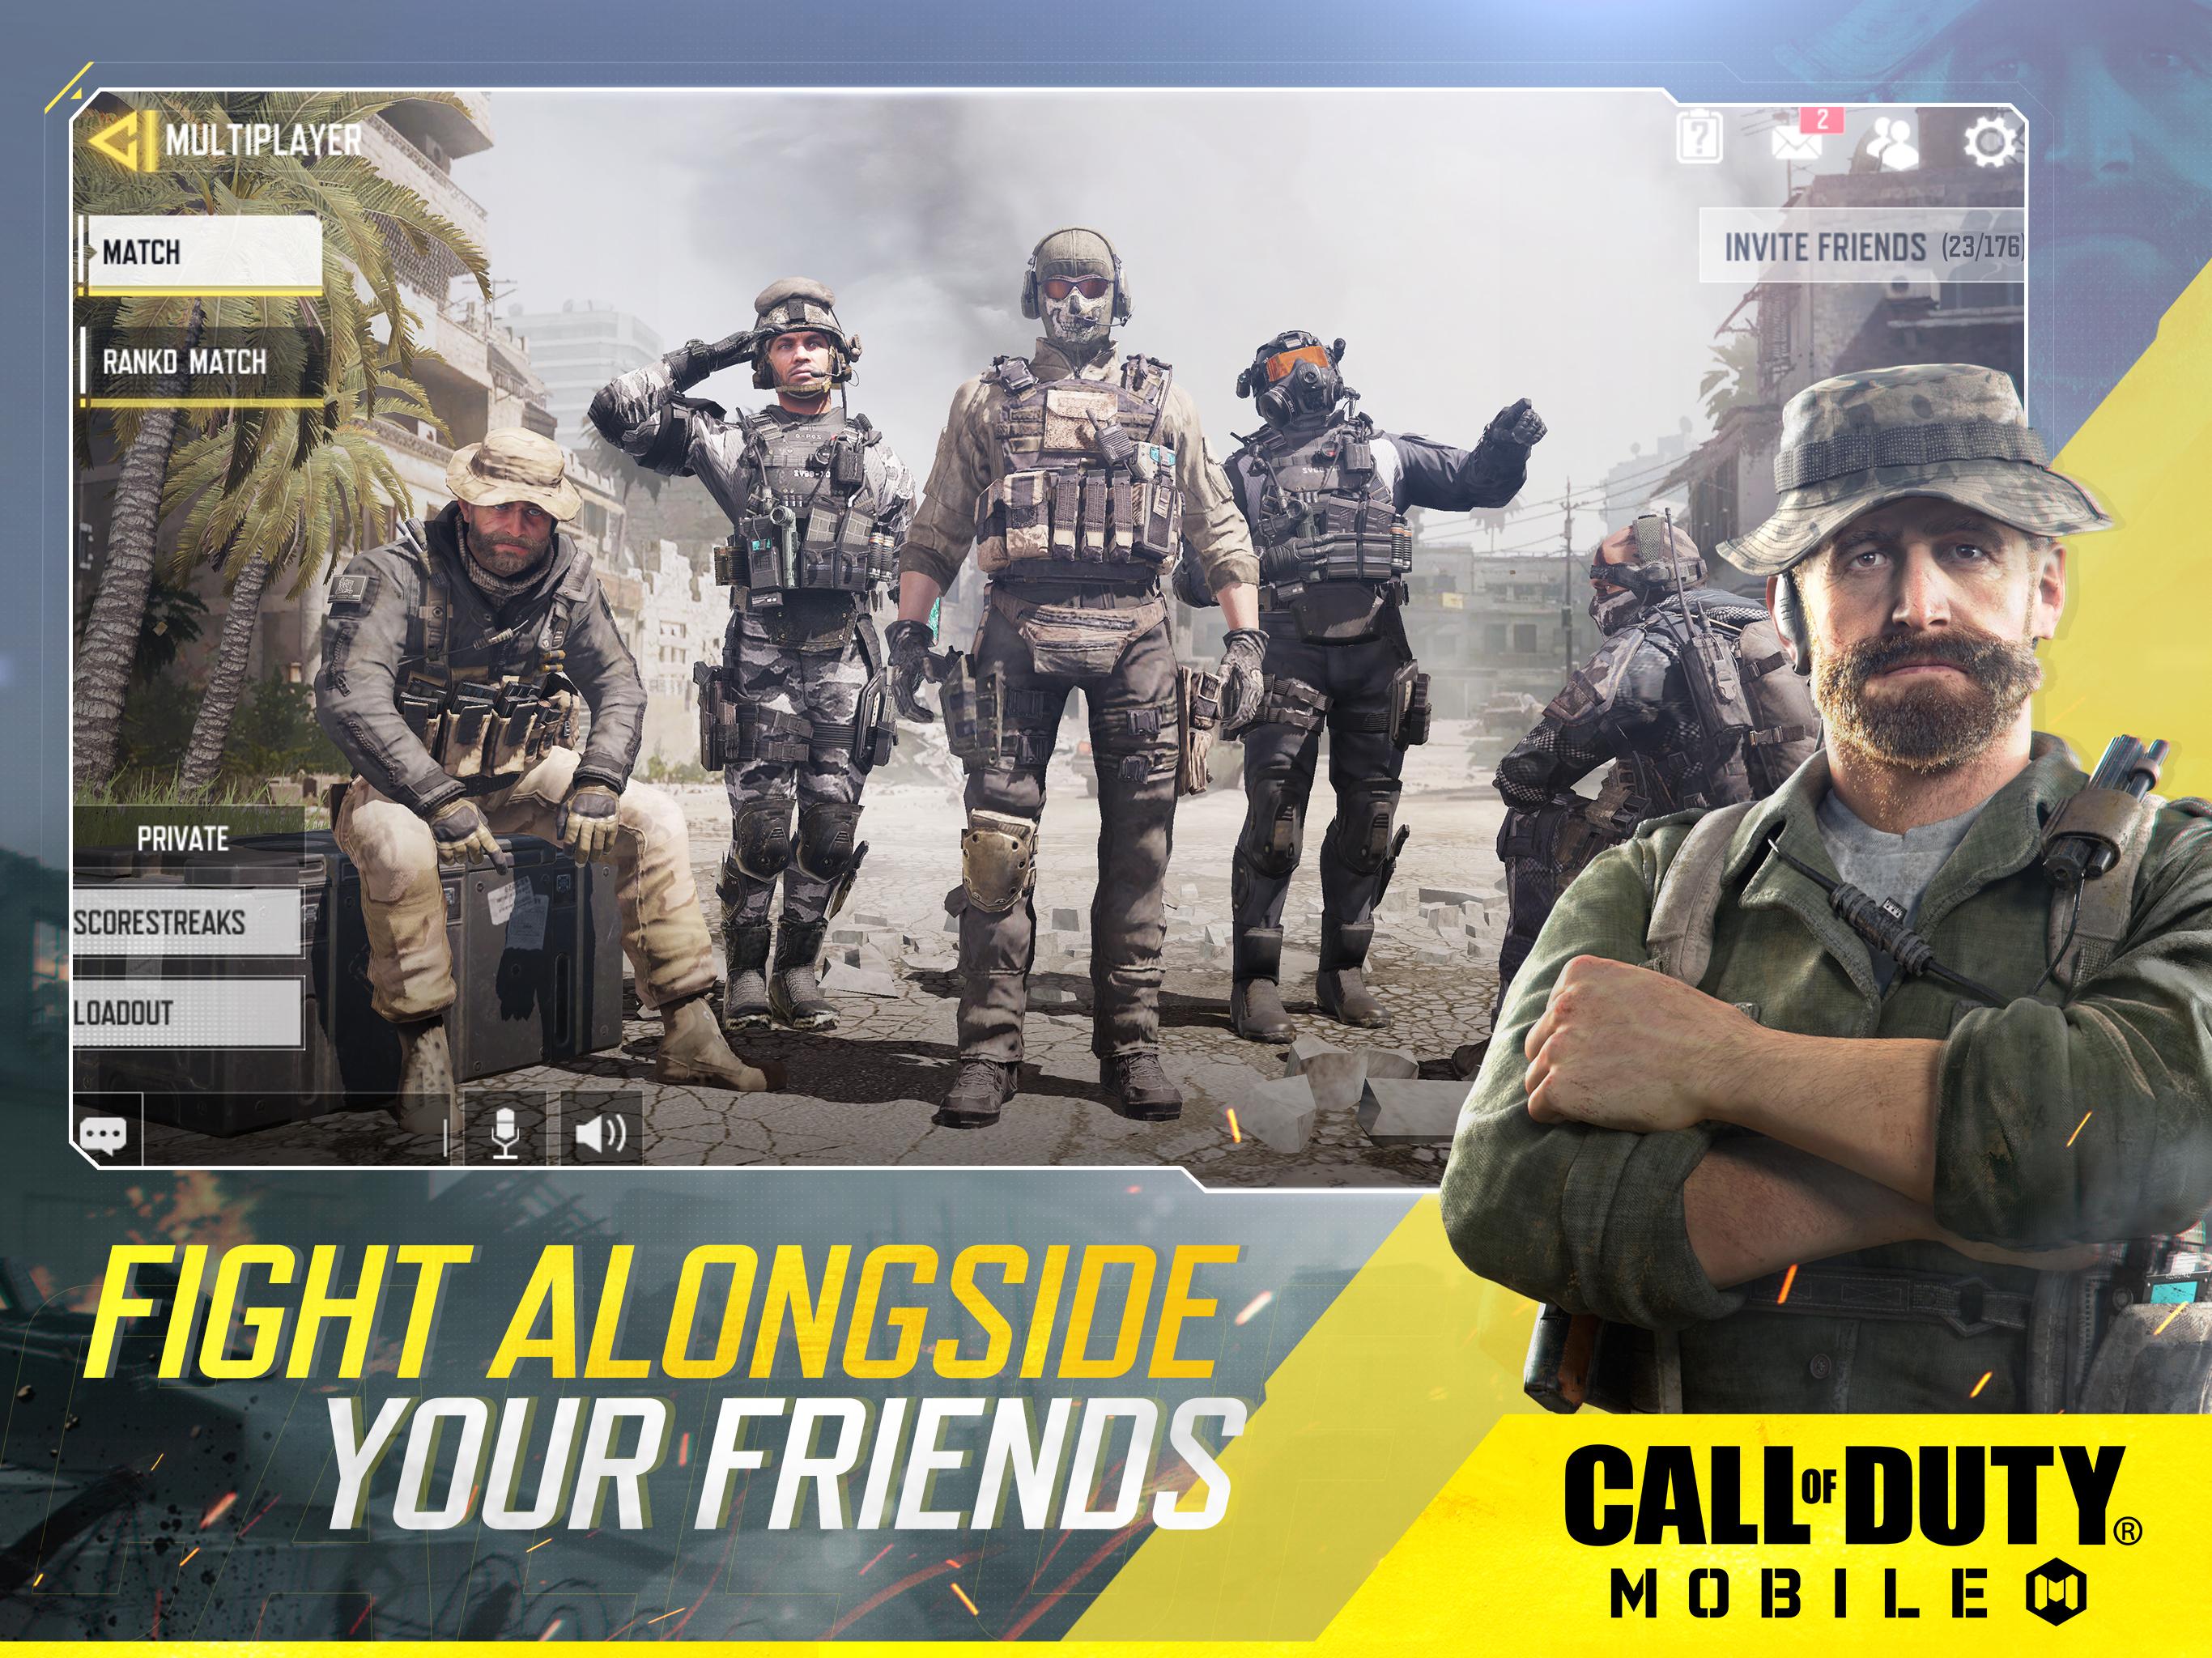 Call of Duty: Legends of War Download - Call of Duty Mobile ... - 